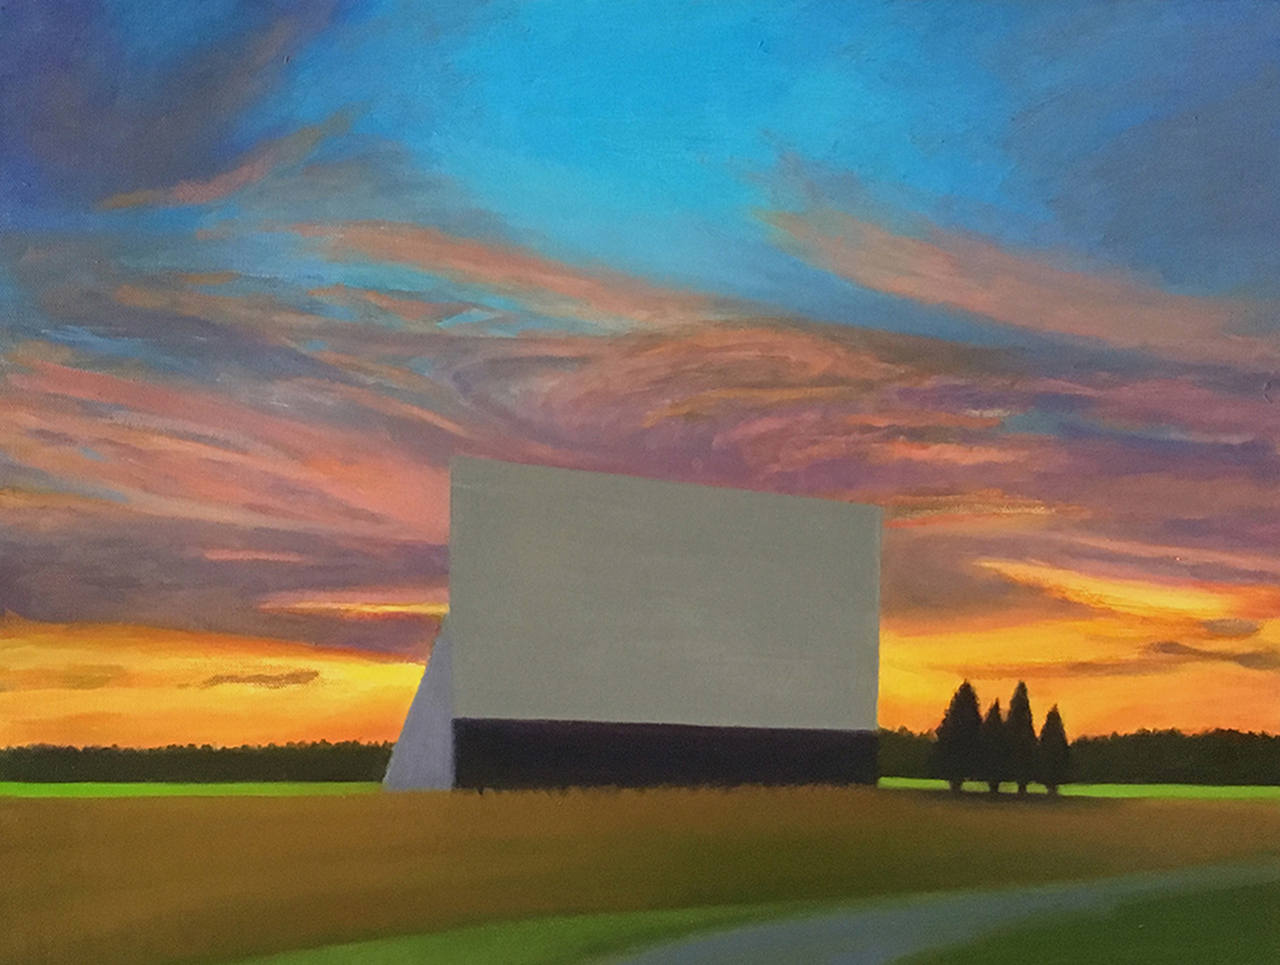 Twilight Drive-In Study by David Davenport 16X20 oil on canvas at Craven Allen Gallery 1400